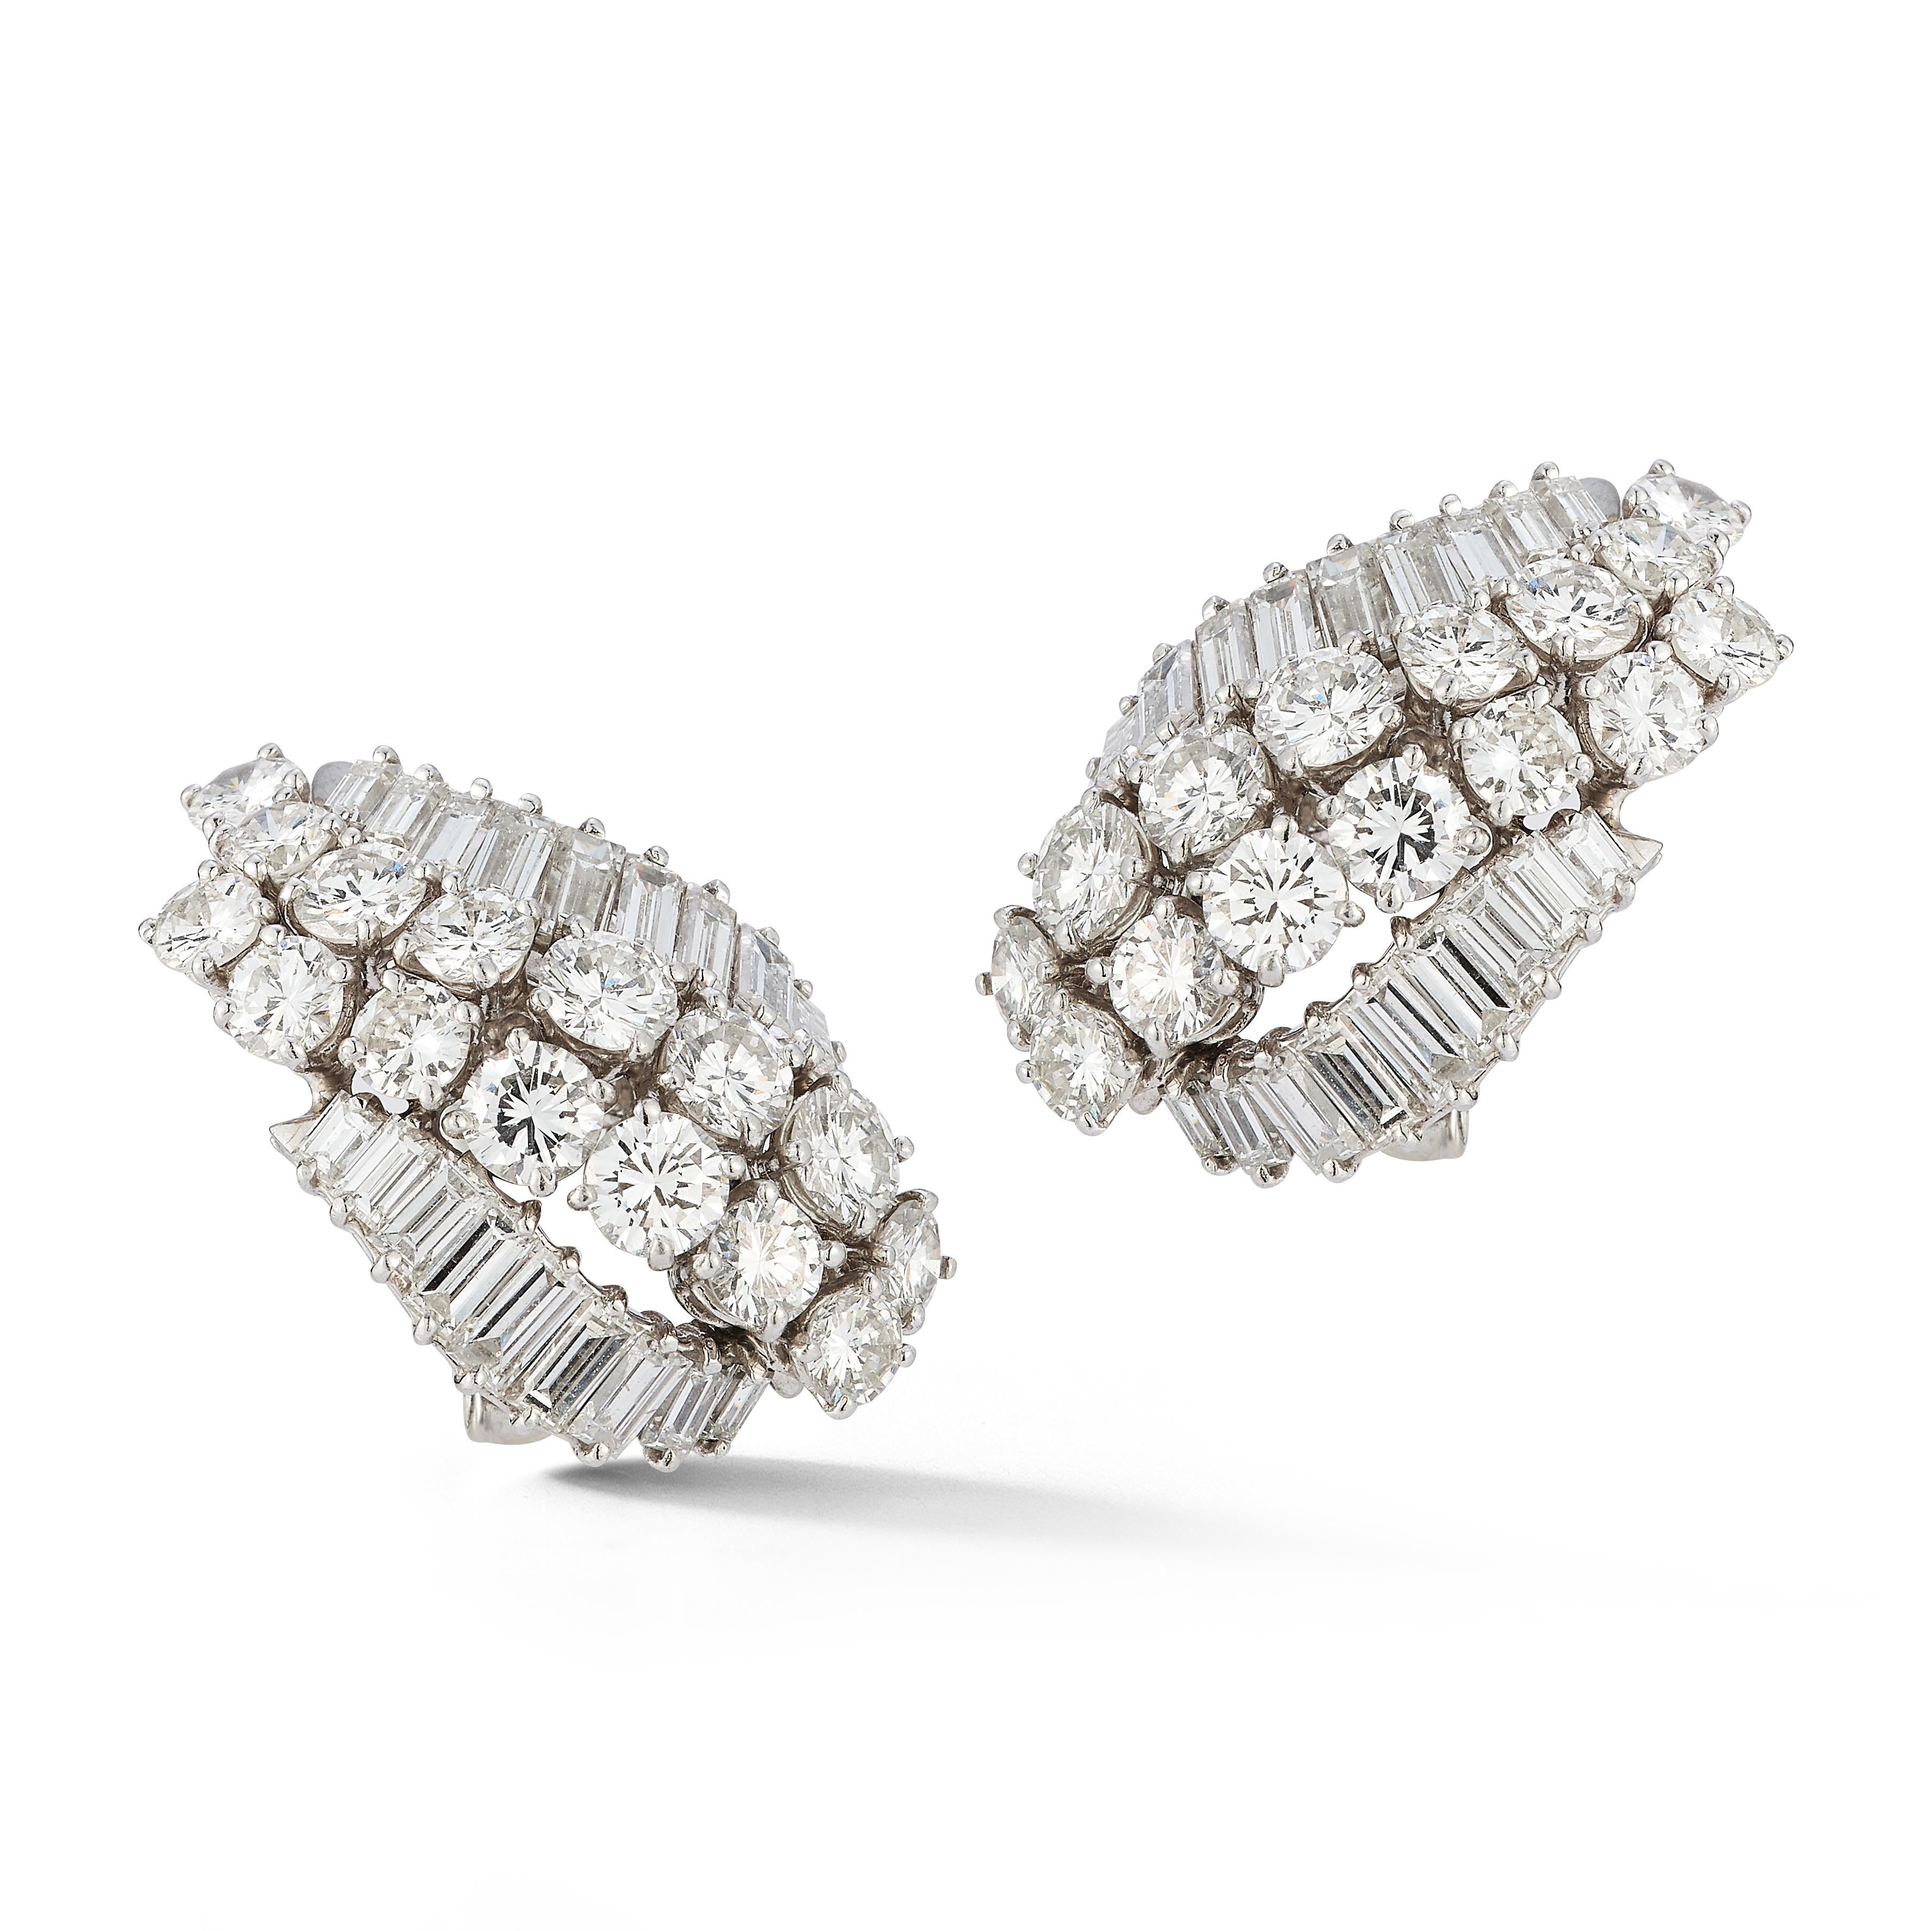 David Webb Diamond Earrings

A pair of platinum and 18 karat white gold earrings set with round cut and baguette cut diamonds

Signed Webb
Stamped 18k & platinum

Total Approximate Diamond Weight: 5 - 6 carats

Metal Type: Platinum & 18 karat white